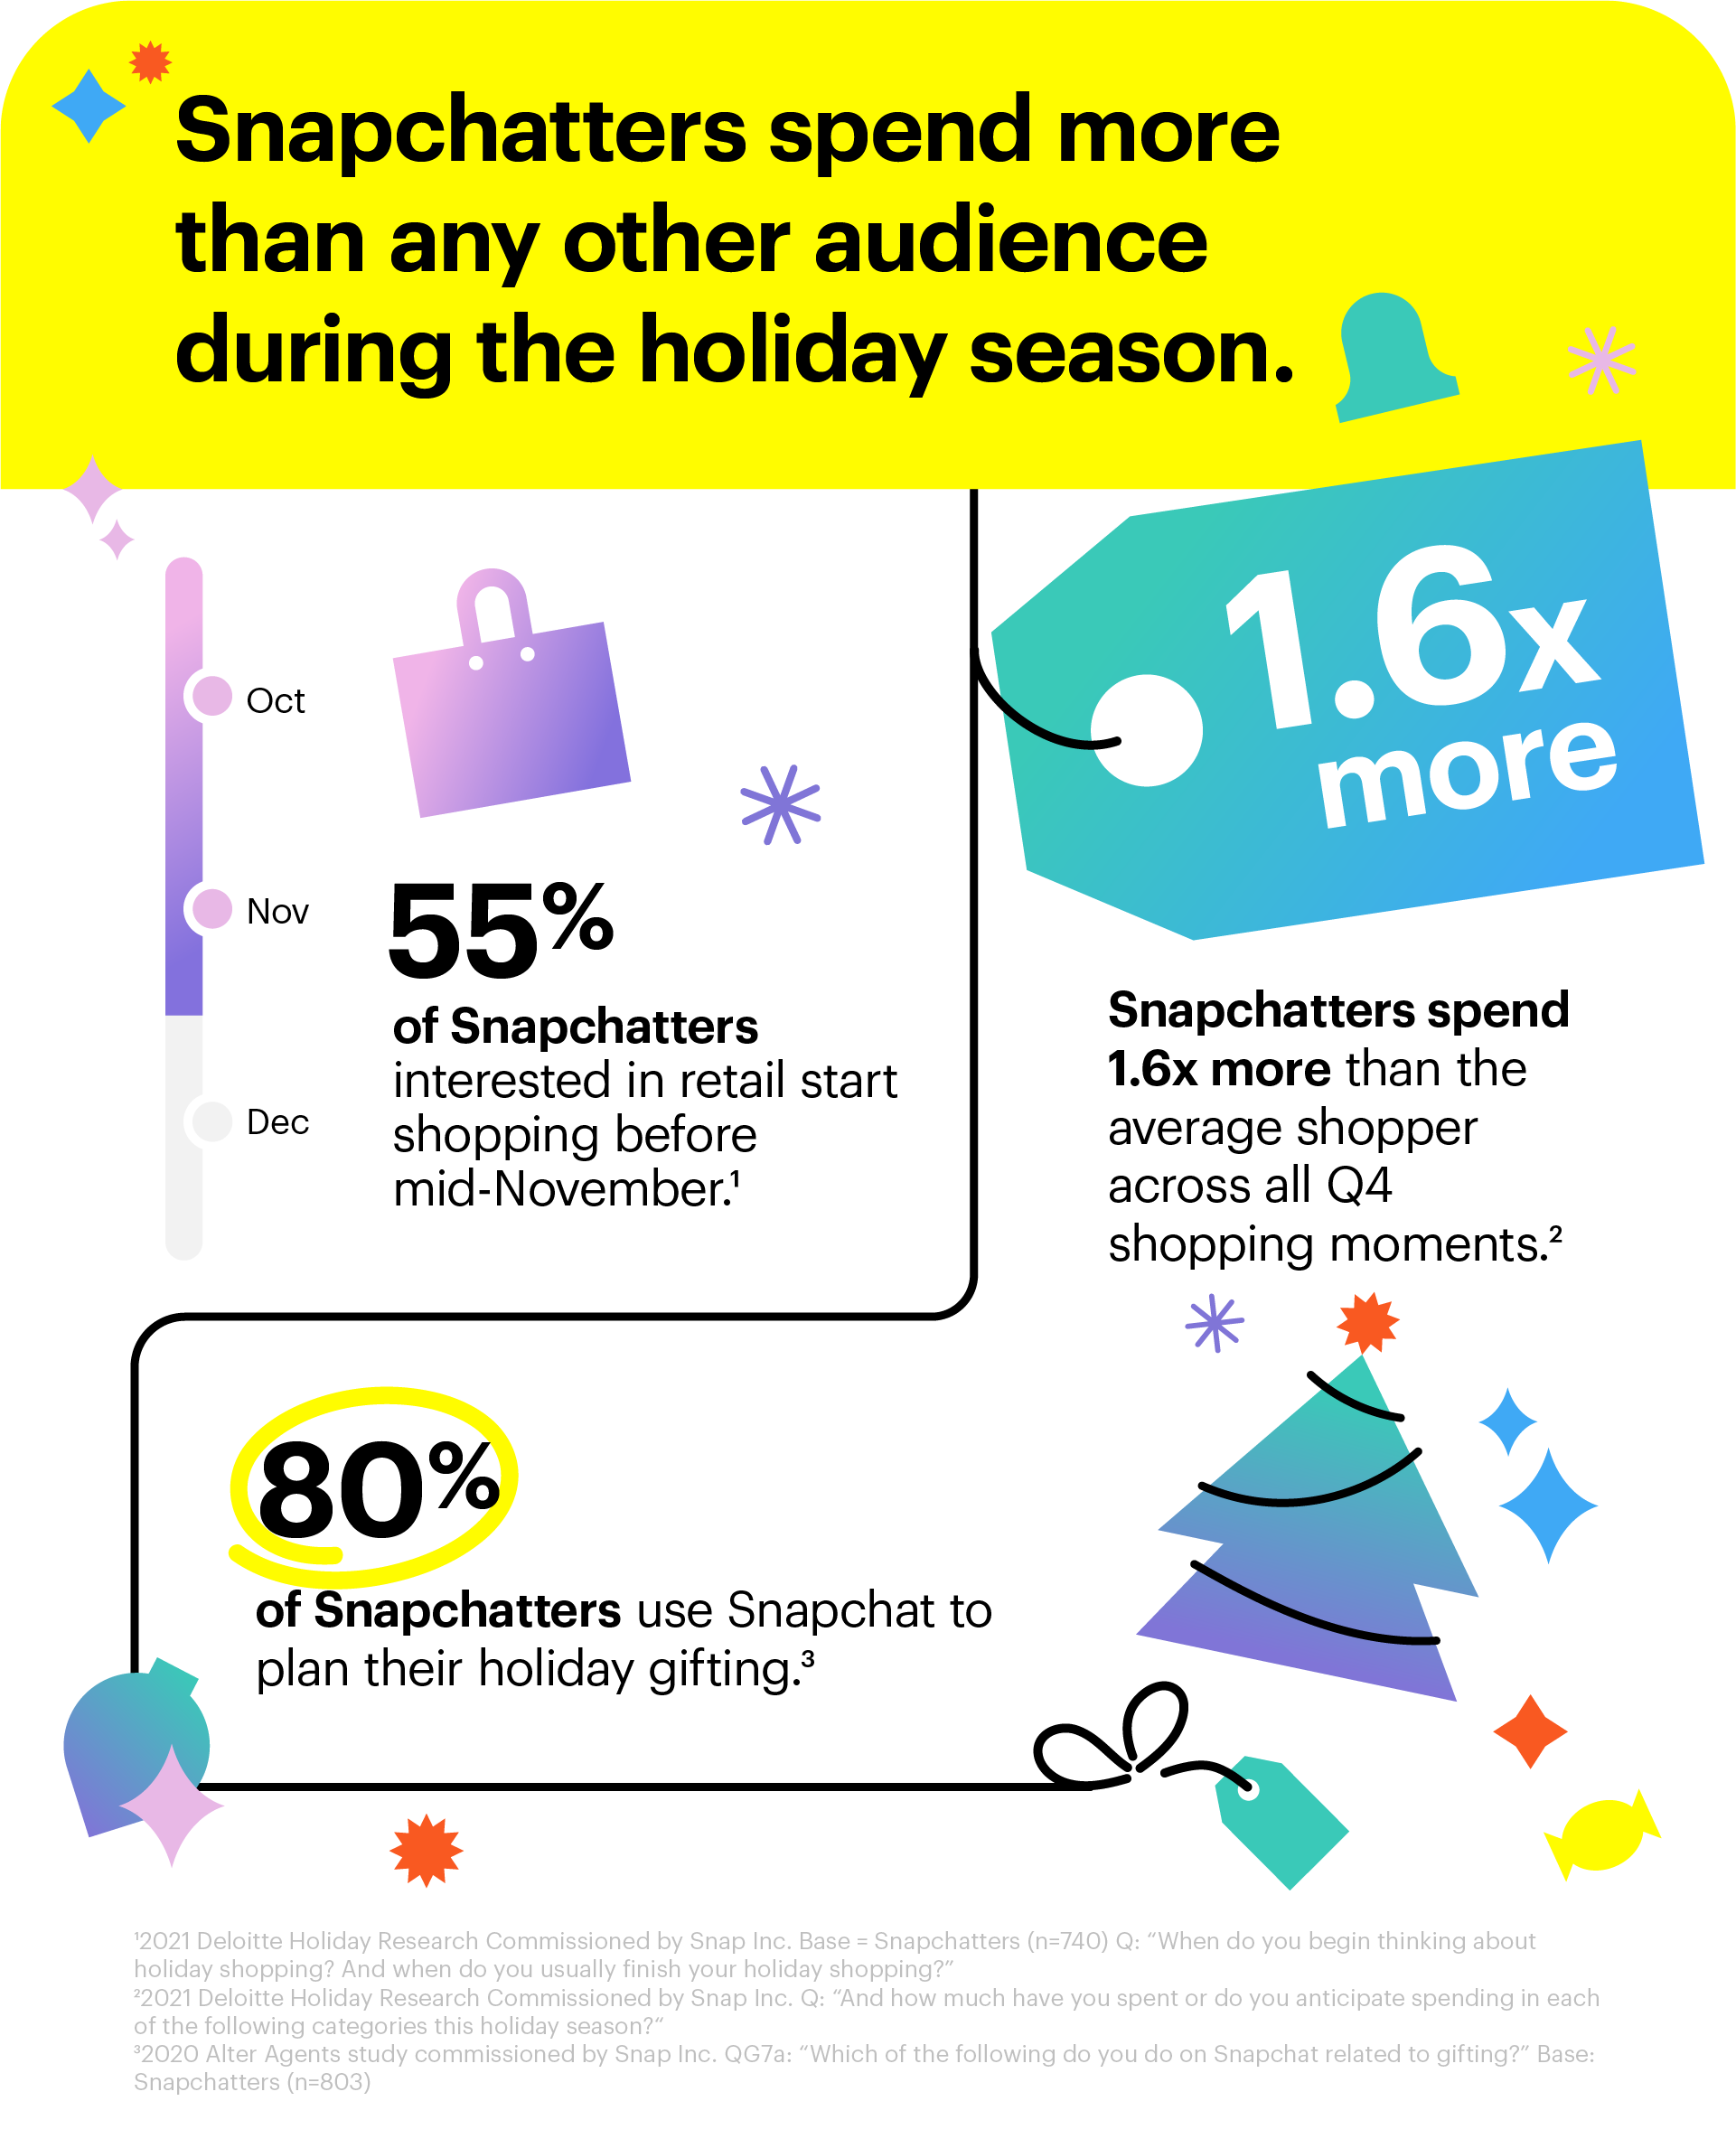 Snapchatters spend more than any other audience during the holiday season.